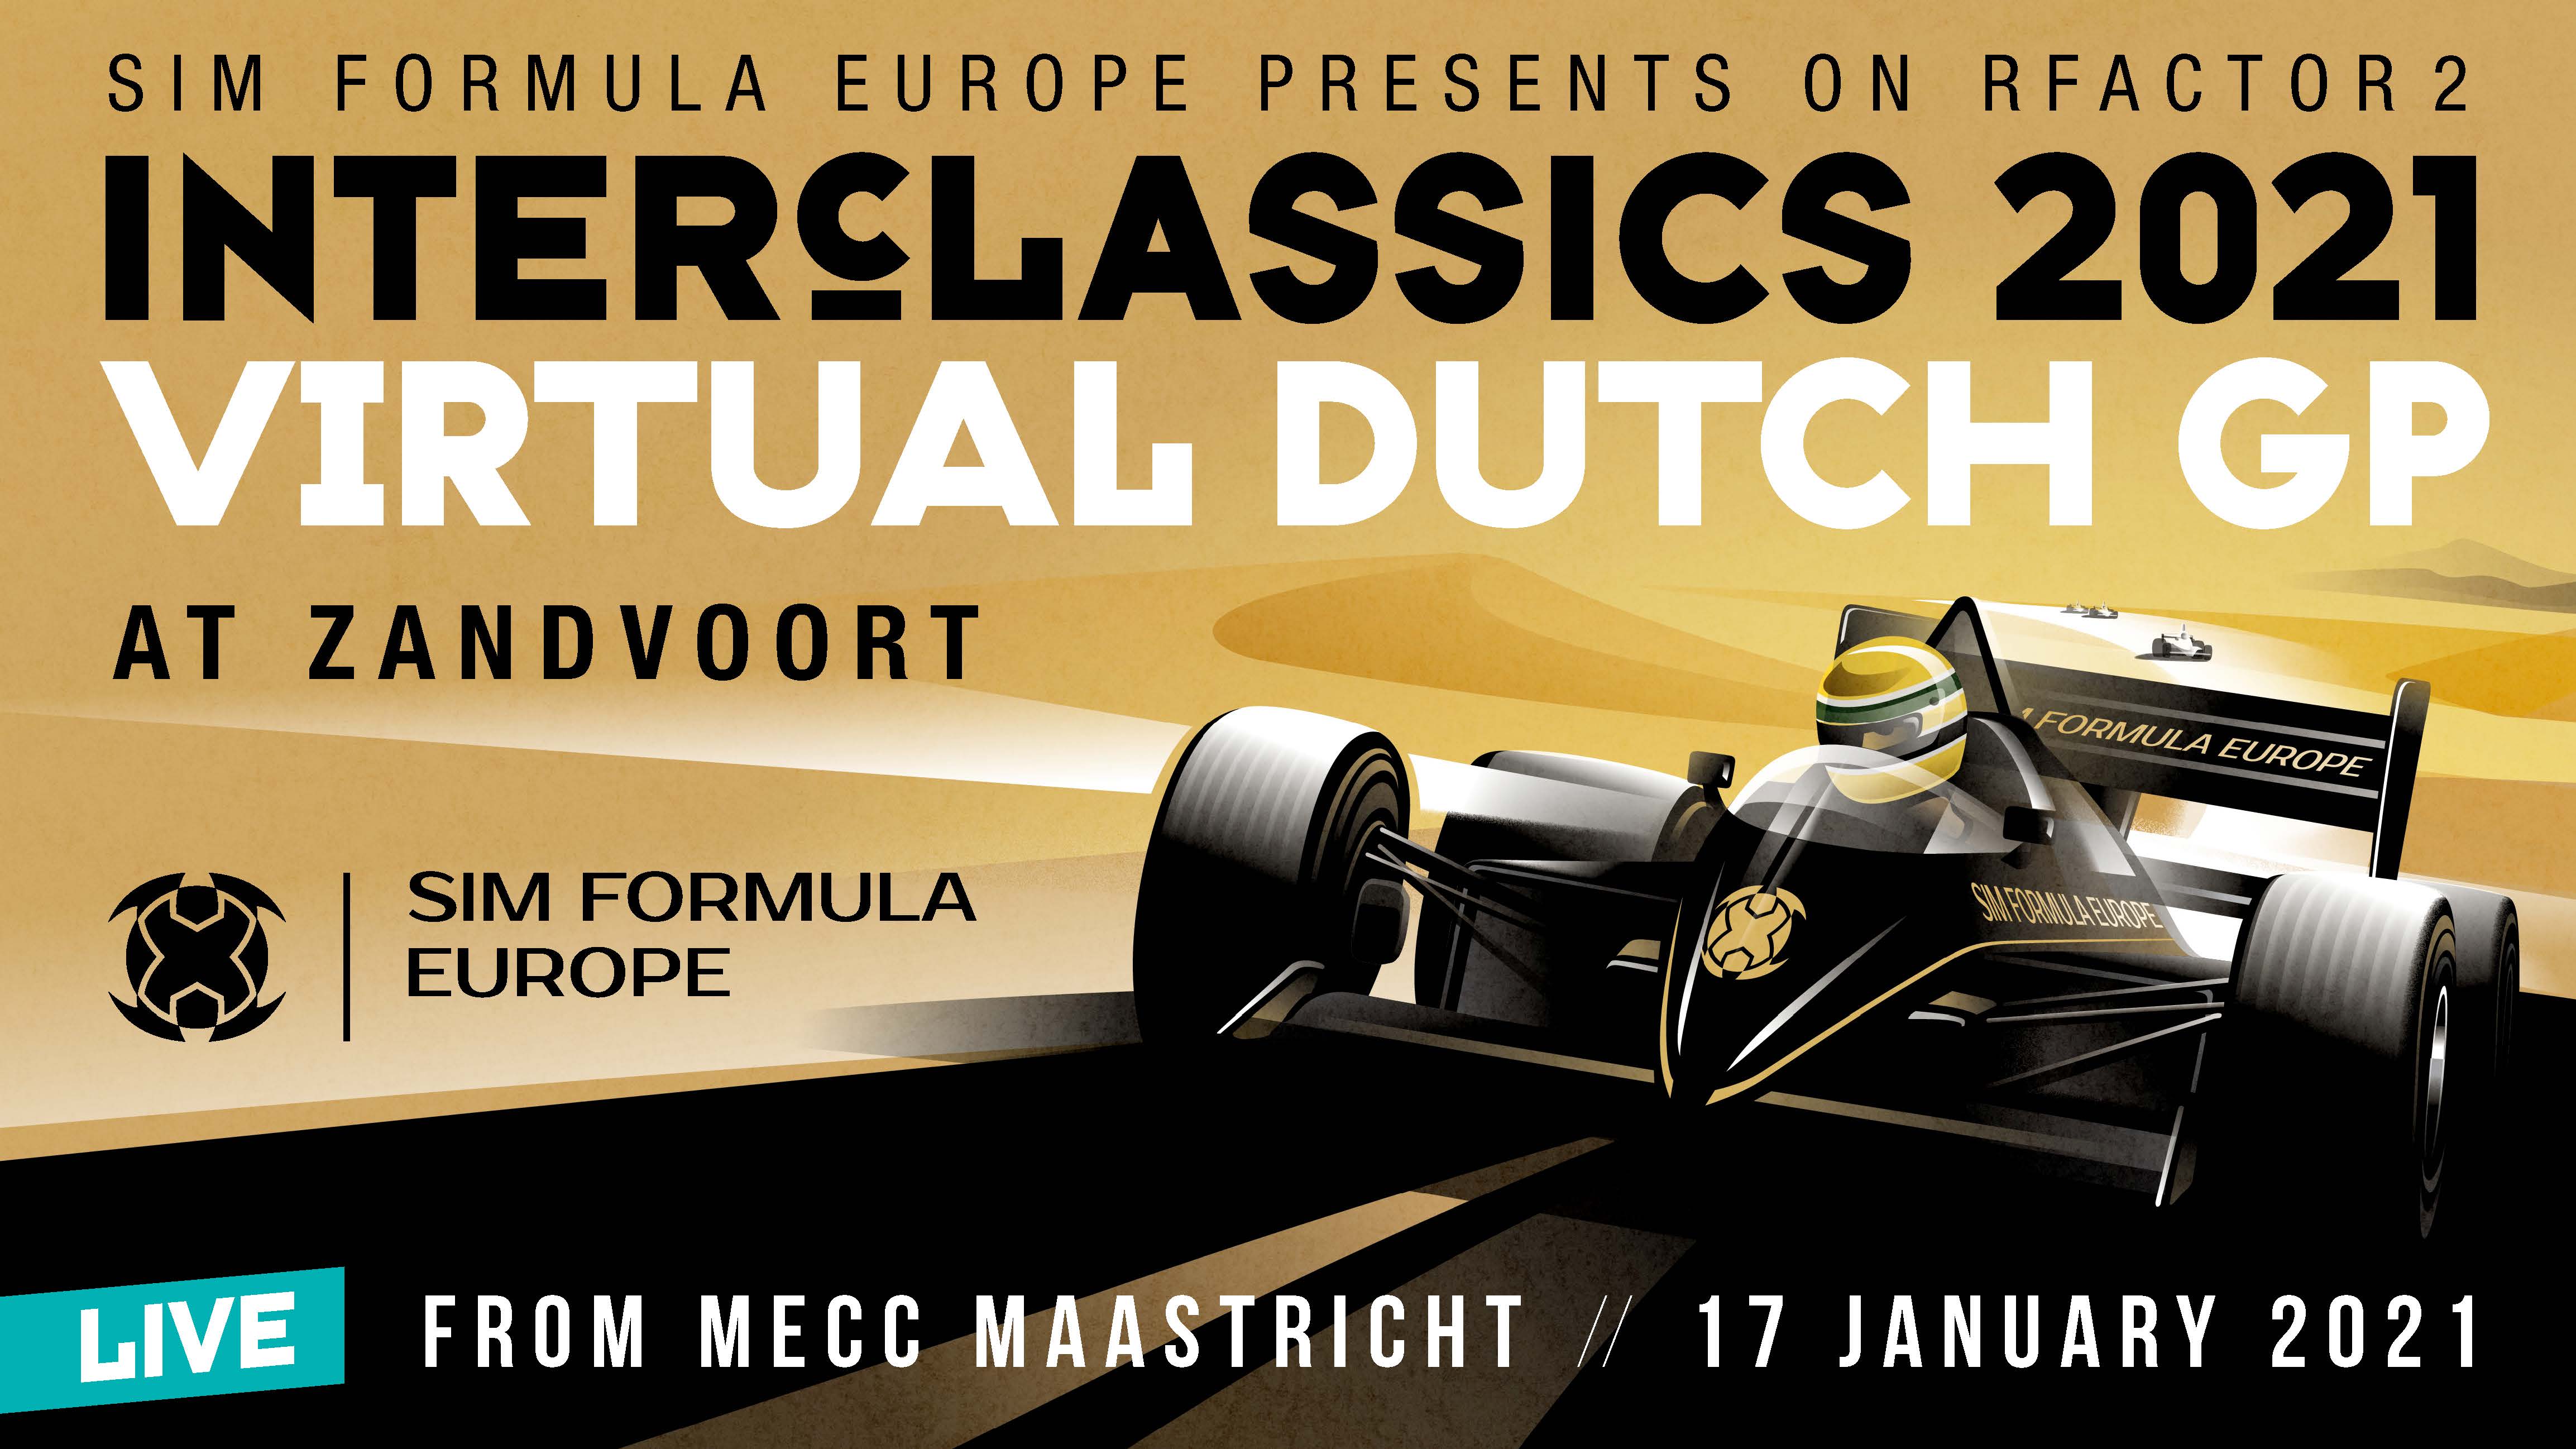 Maastricht to be stage for Netherlands’ first virtual Grand Prix